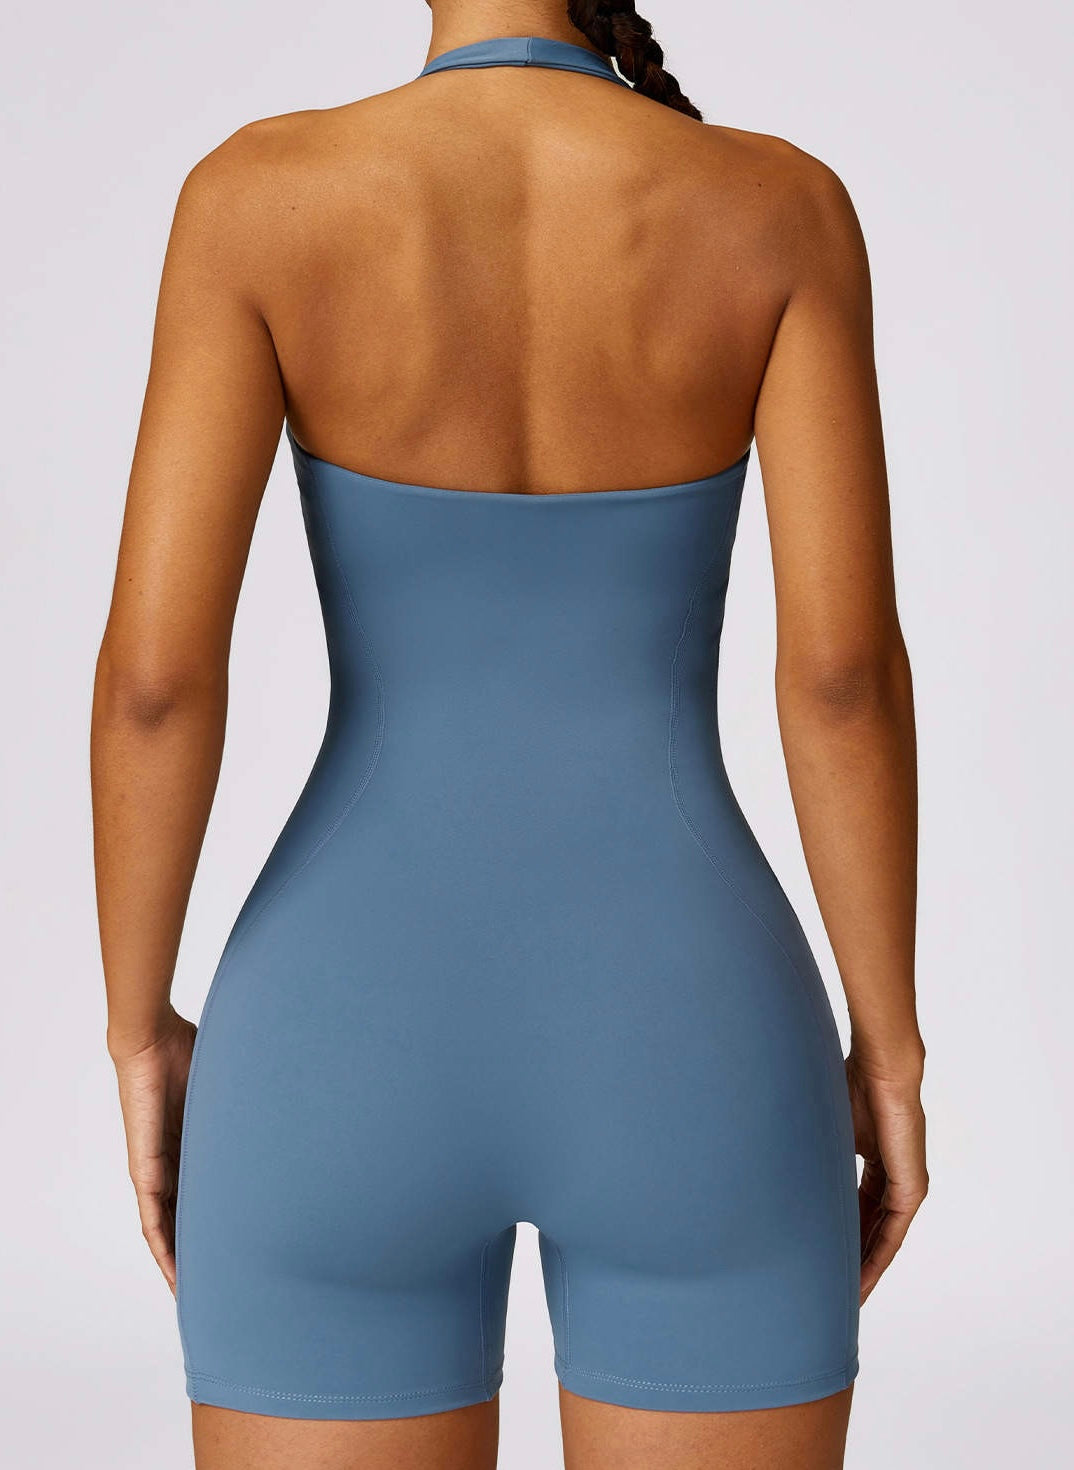 The Perfect Bodysuits